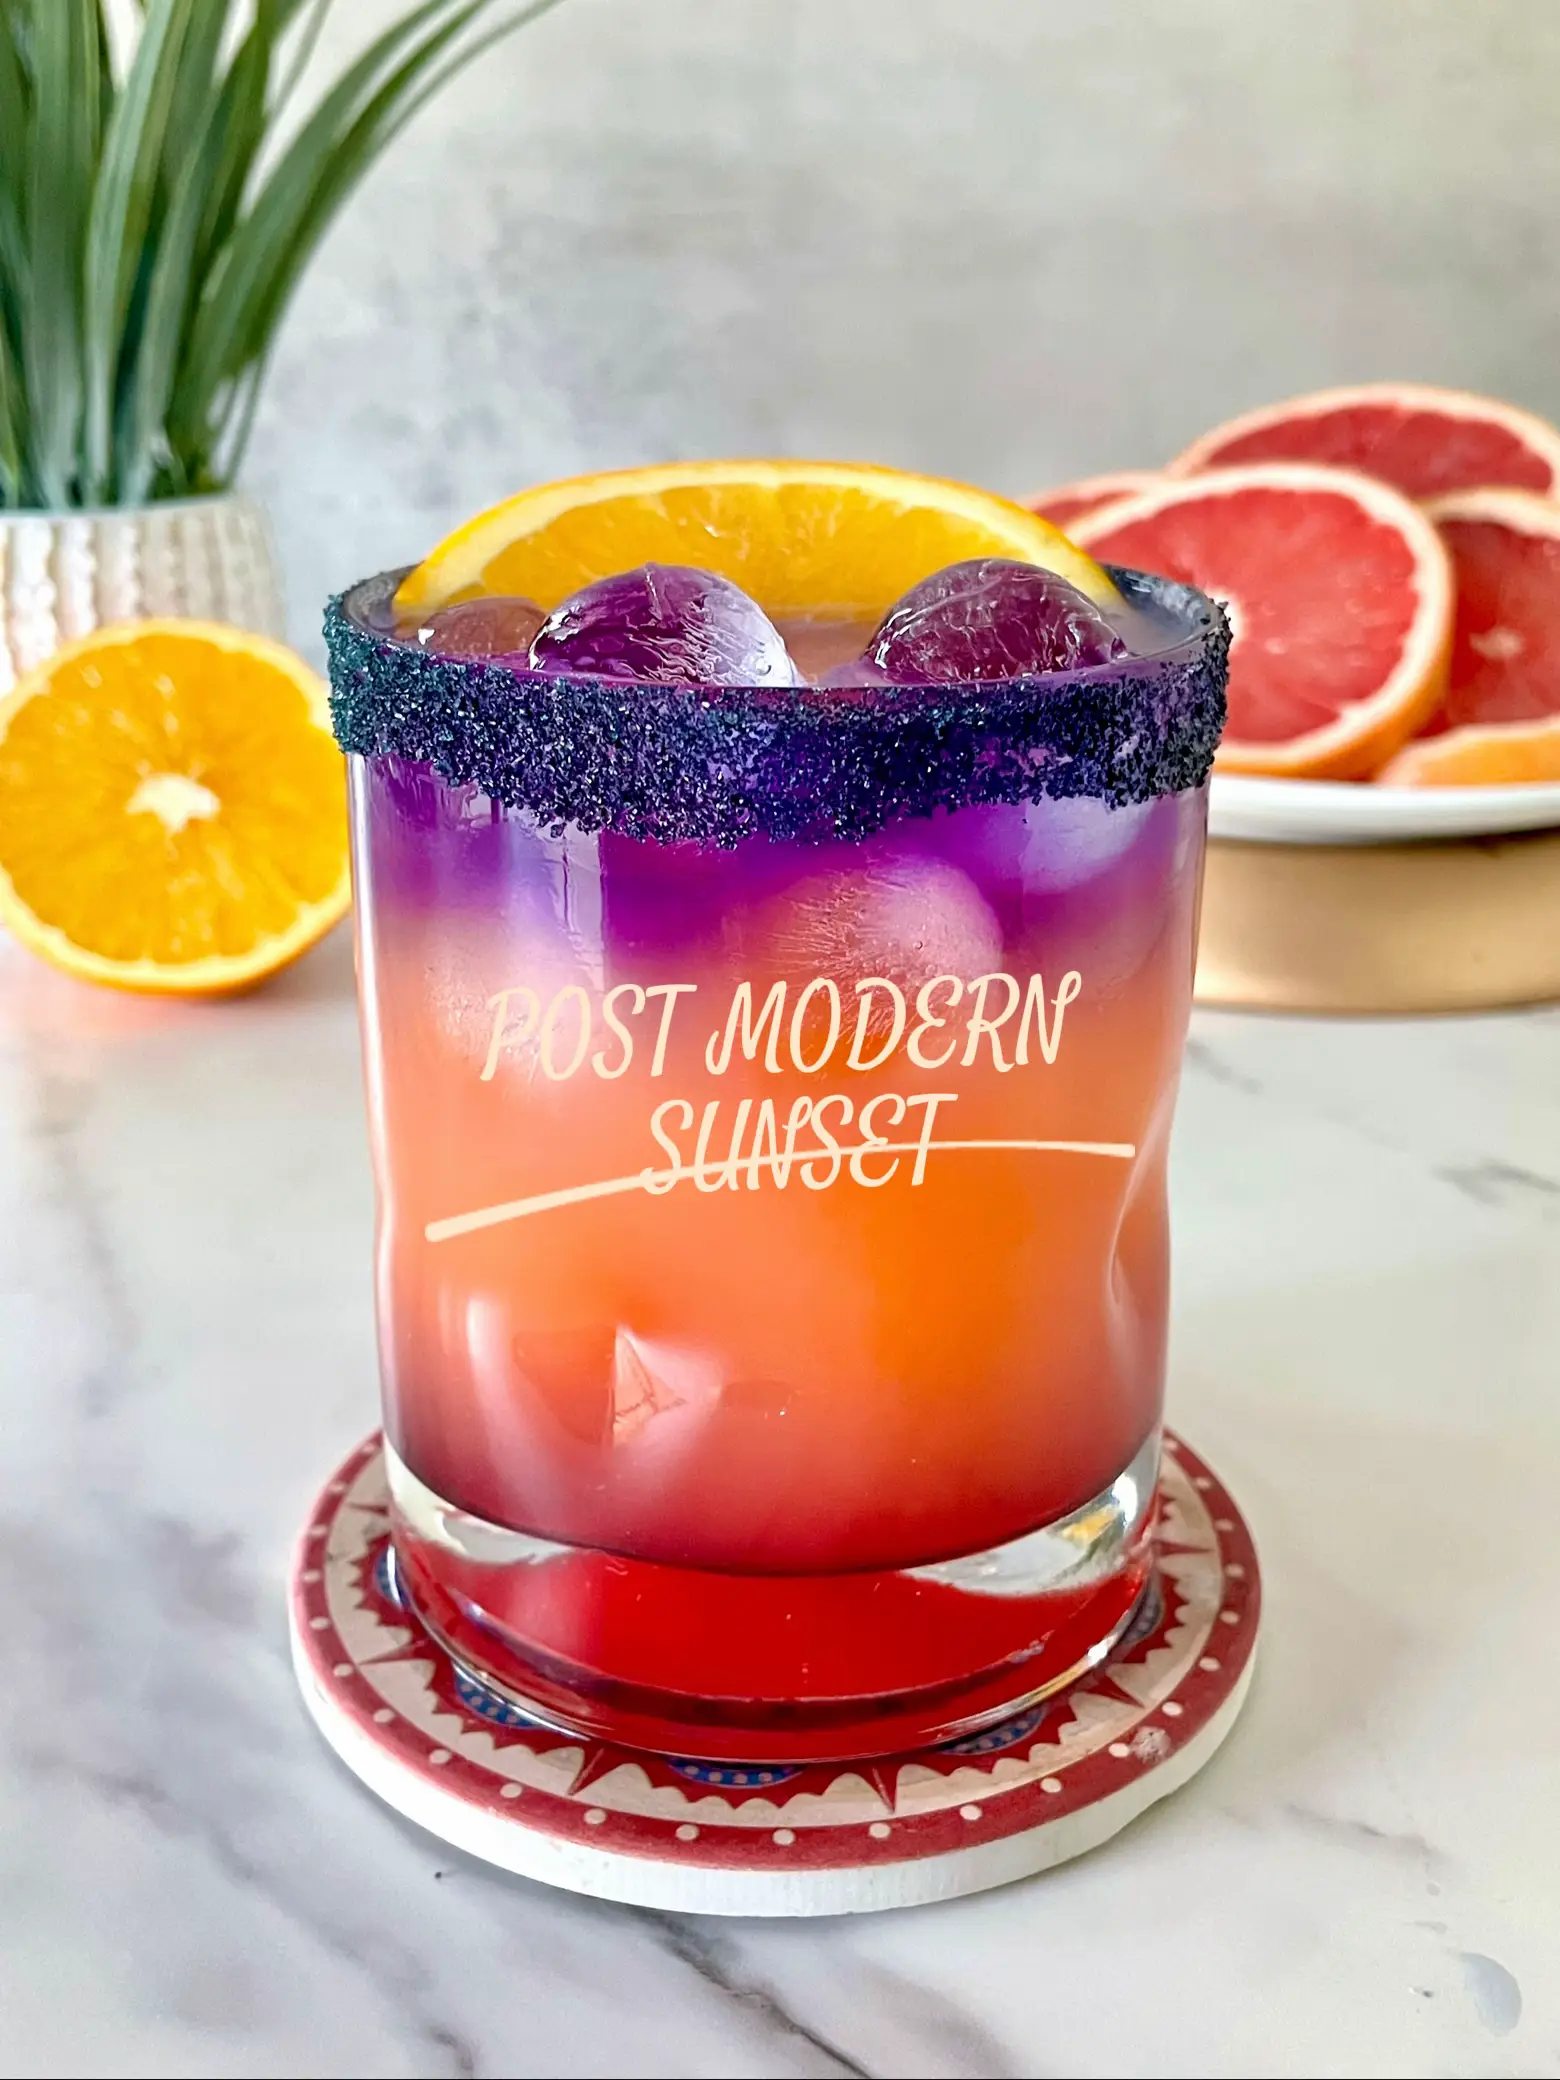 Post Modern Sunset-a twist on the tequila sunrise 's images